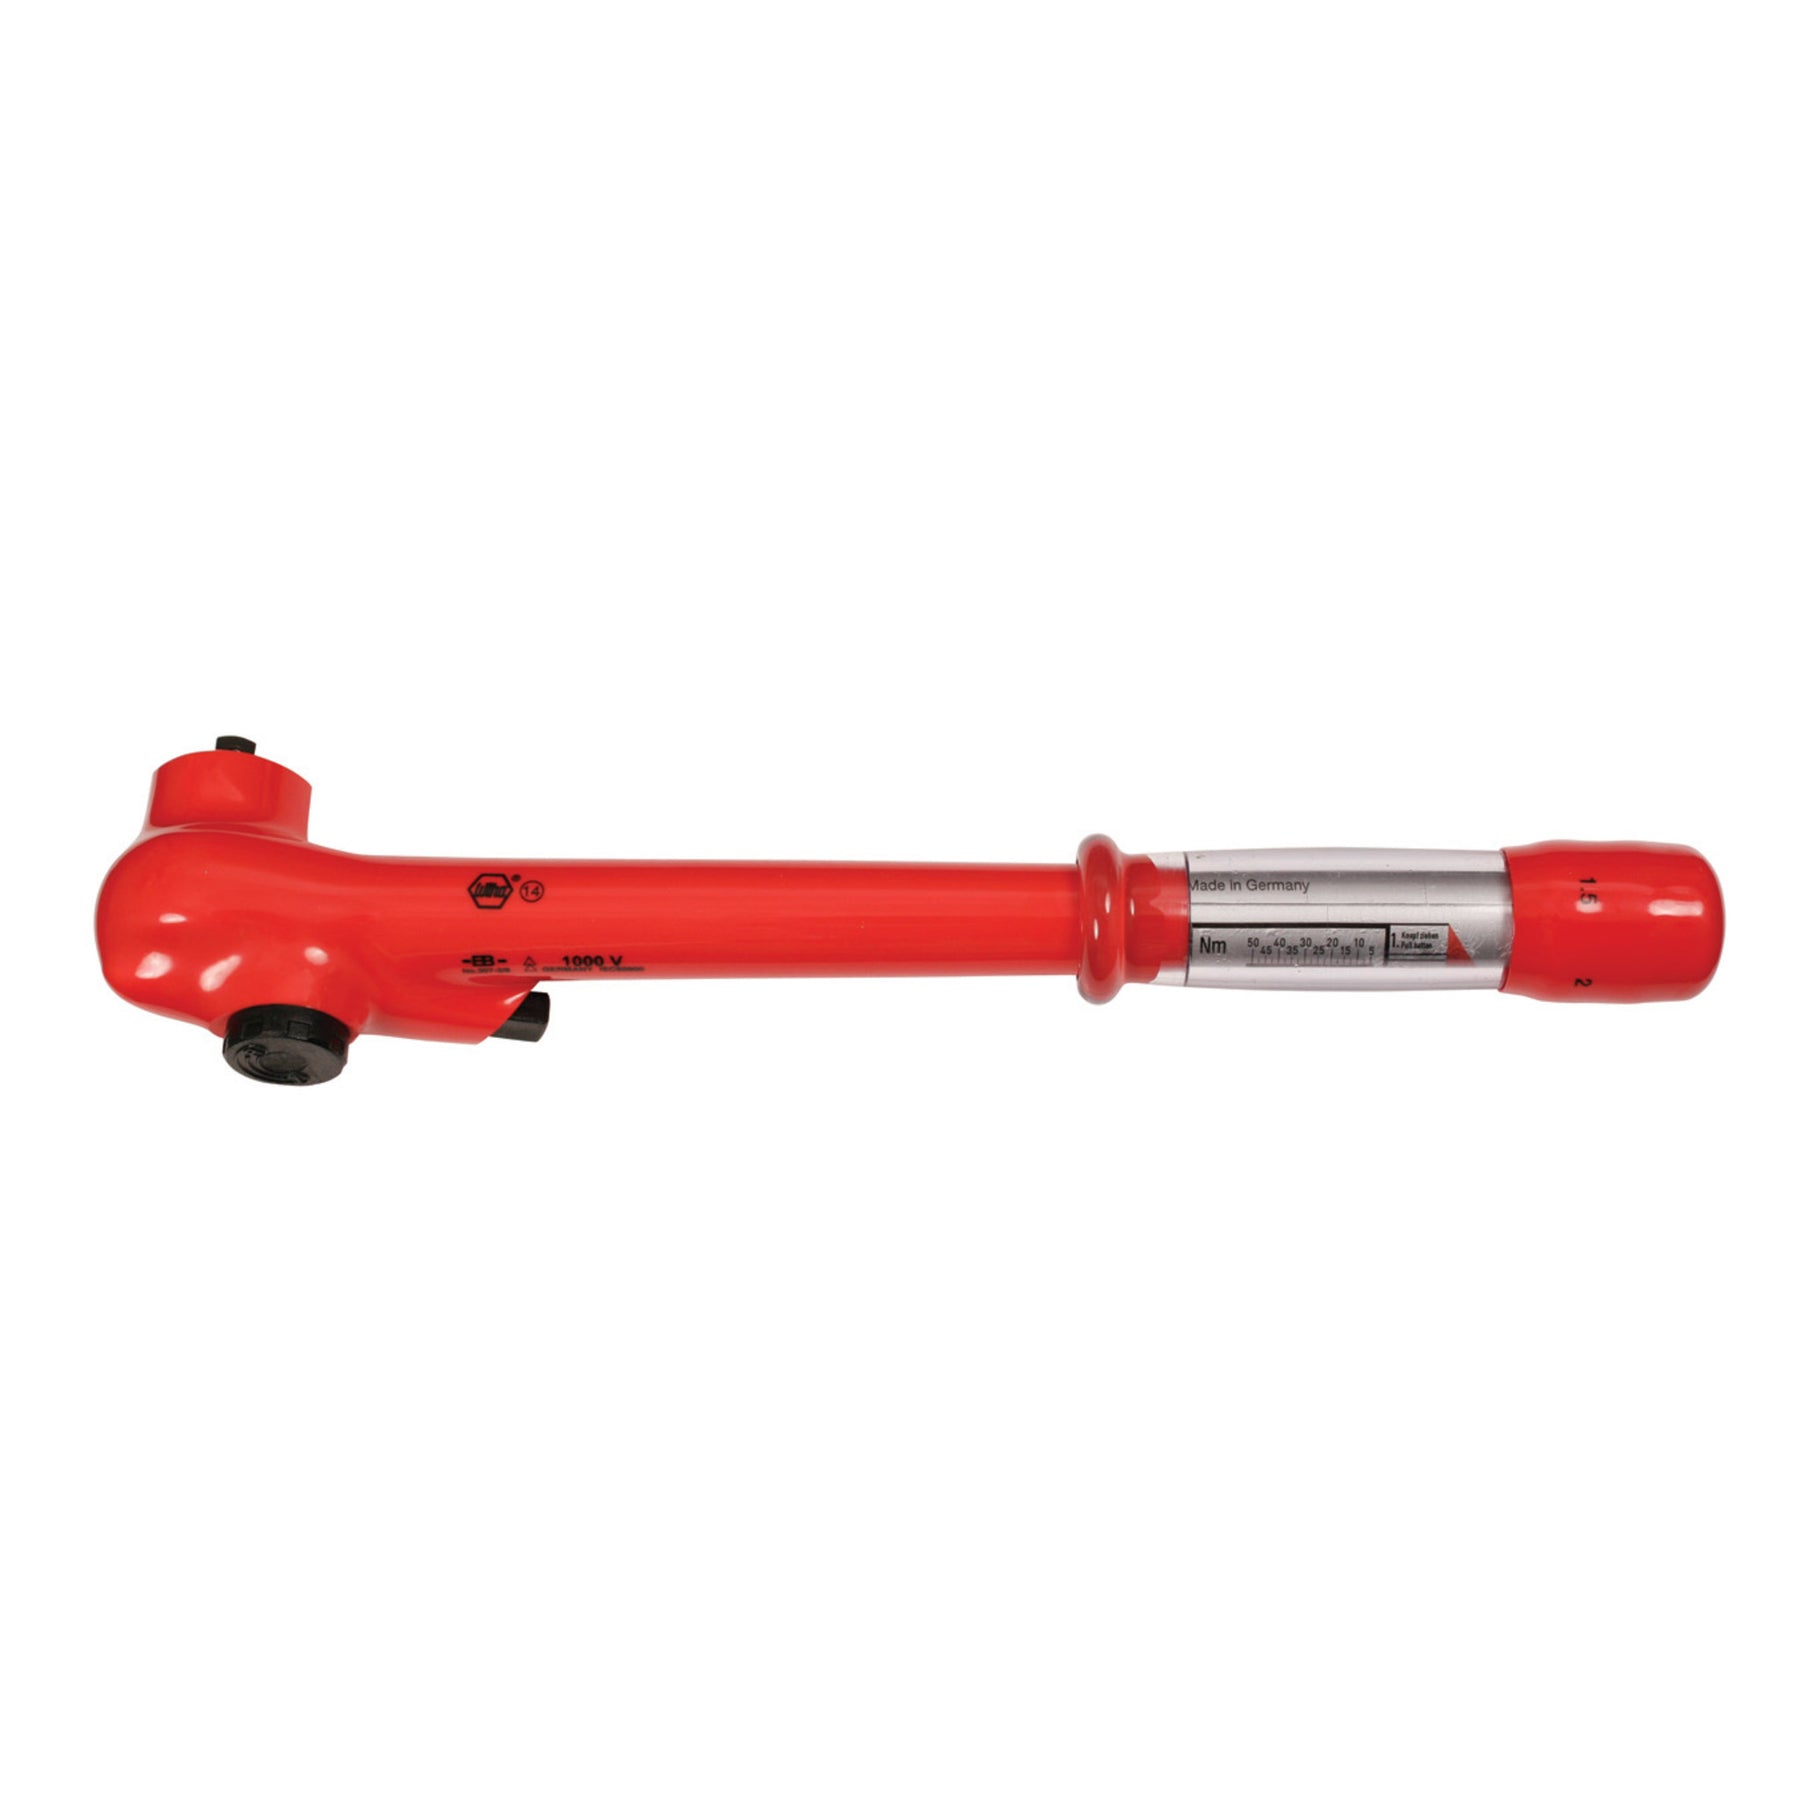 Wiha 30138 Insulated Ratcheting Torque Wrench 3/8" Drive 5-50 Nm